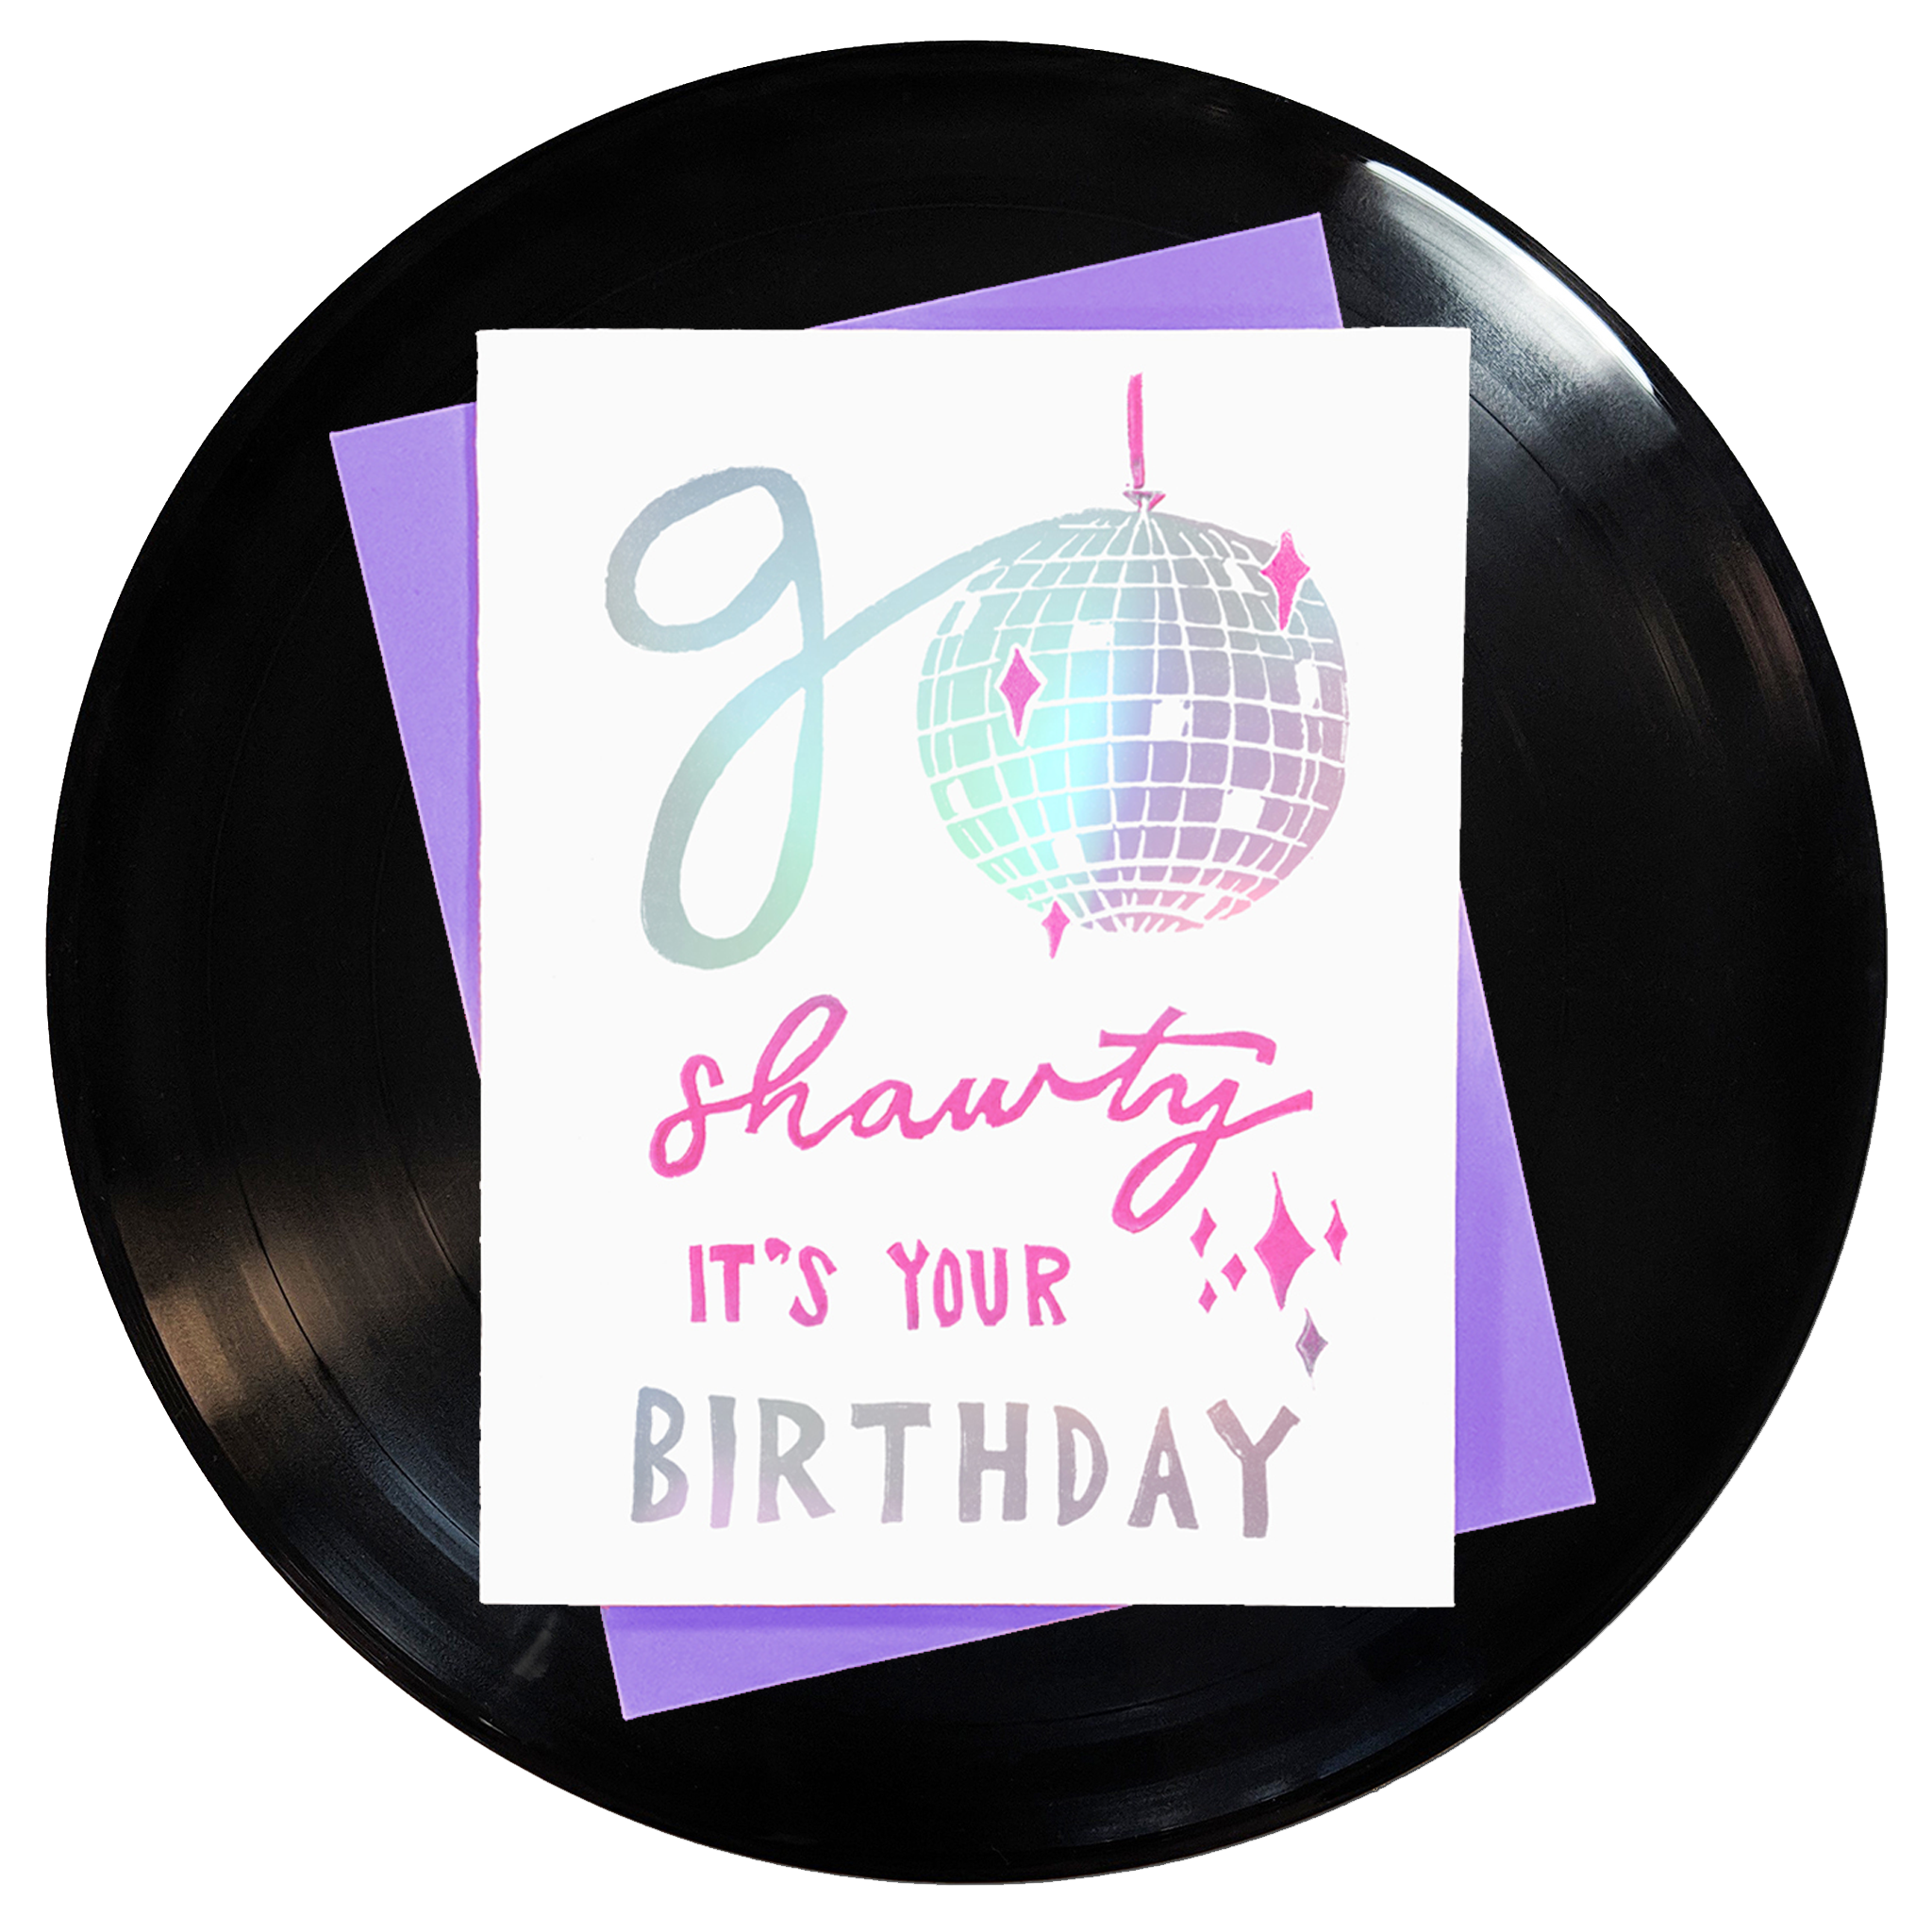 Go Shawty it's your birthday Sticker for Sale by